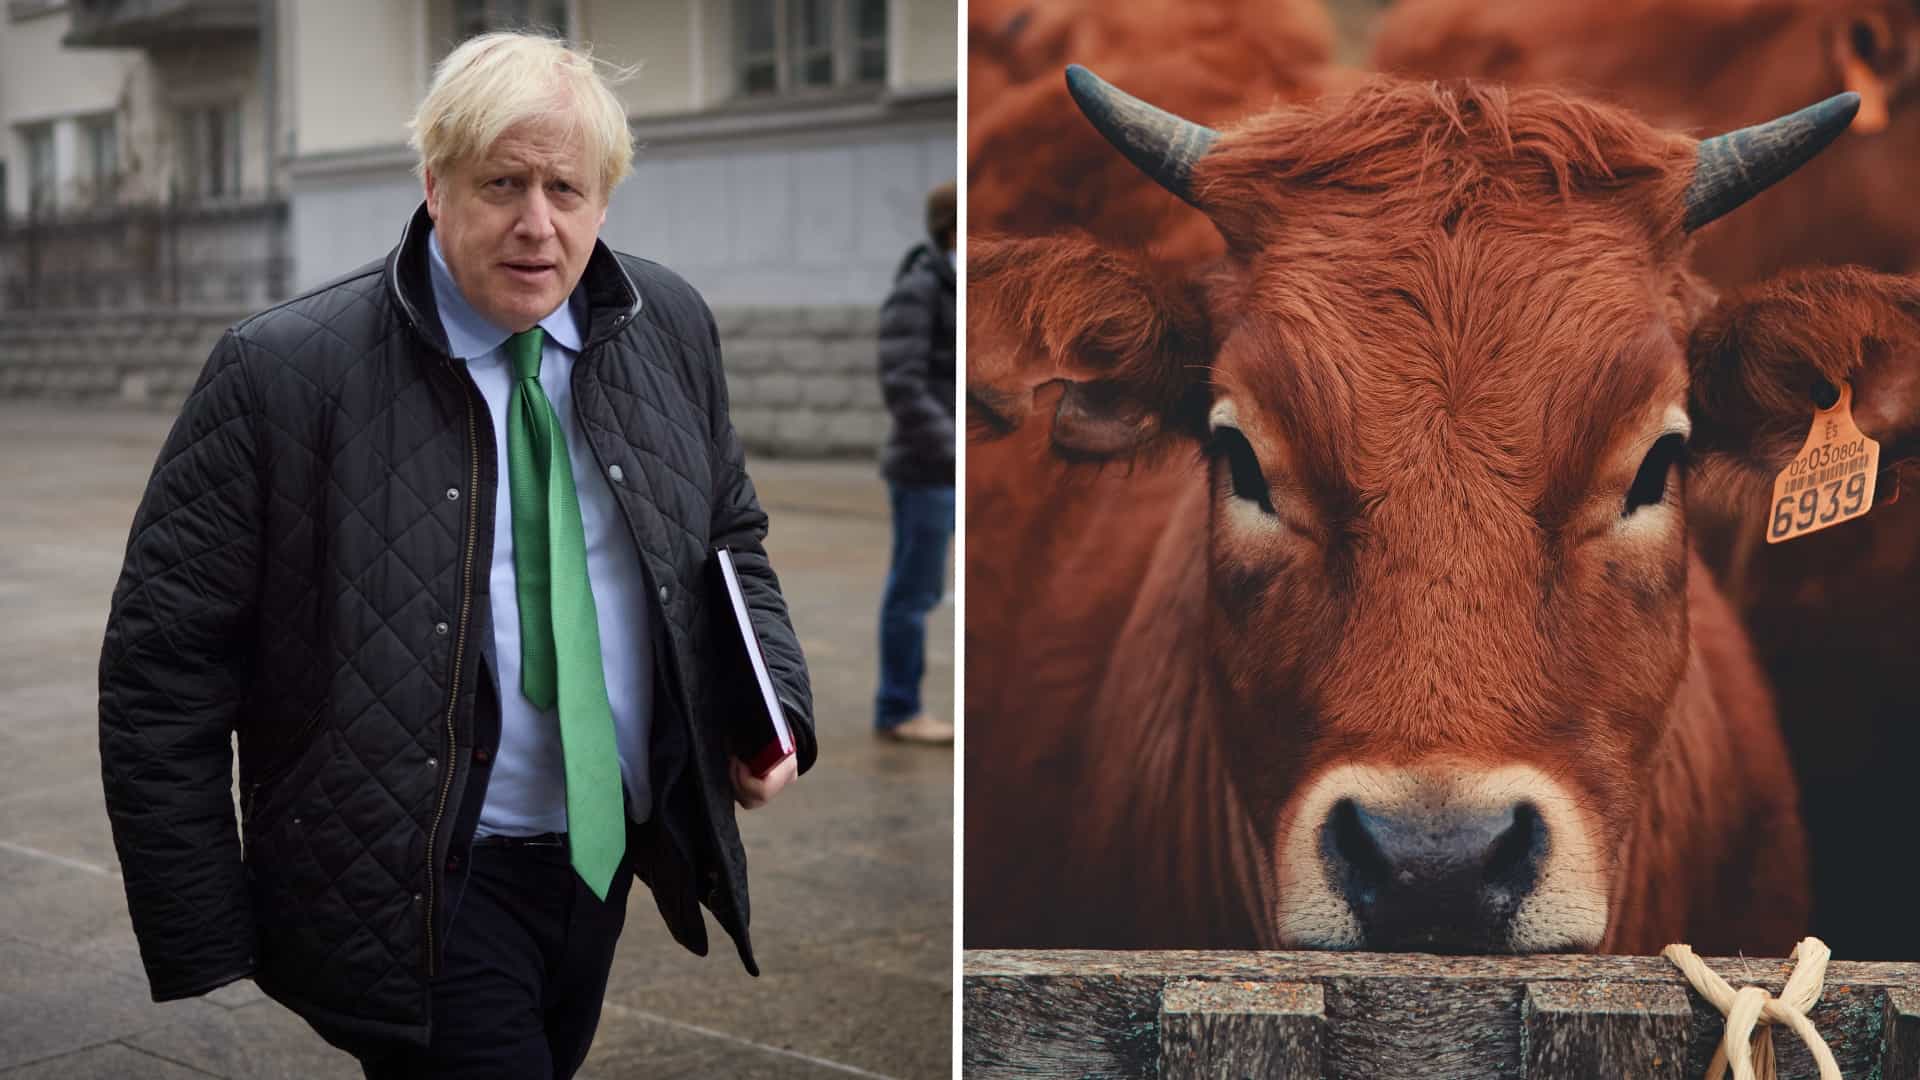 Johnson relaxing by ‘painting cows’ since resigning as PM